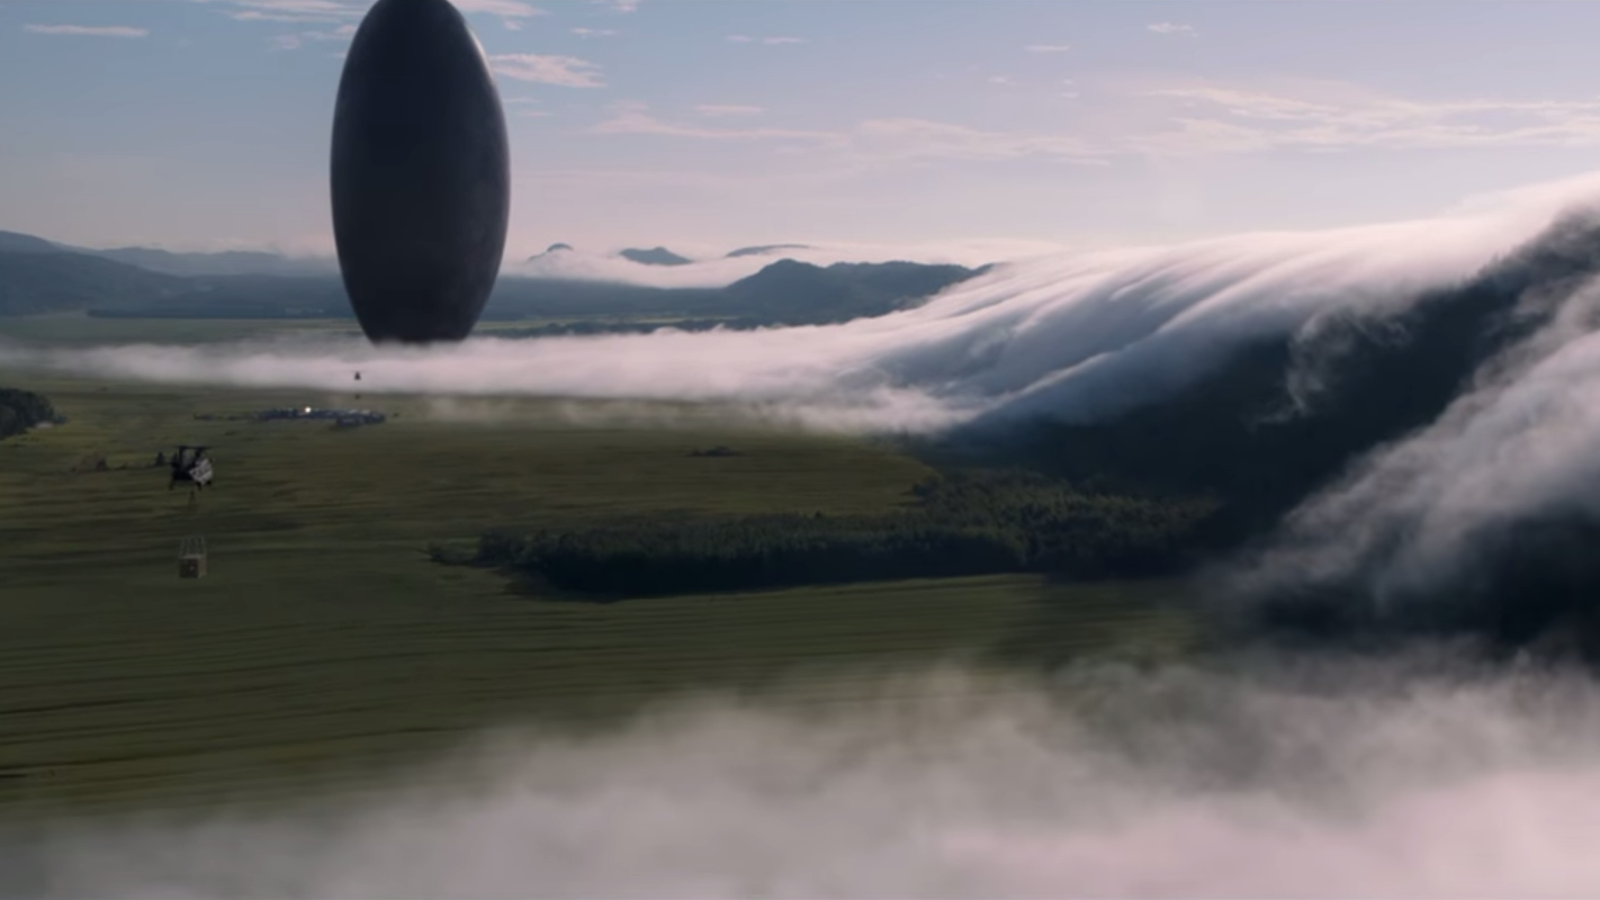 DP Bradford Young on Bridging the 'Mundane and the Spectacular' in Arrival. Den of Geek